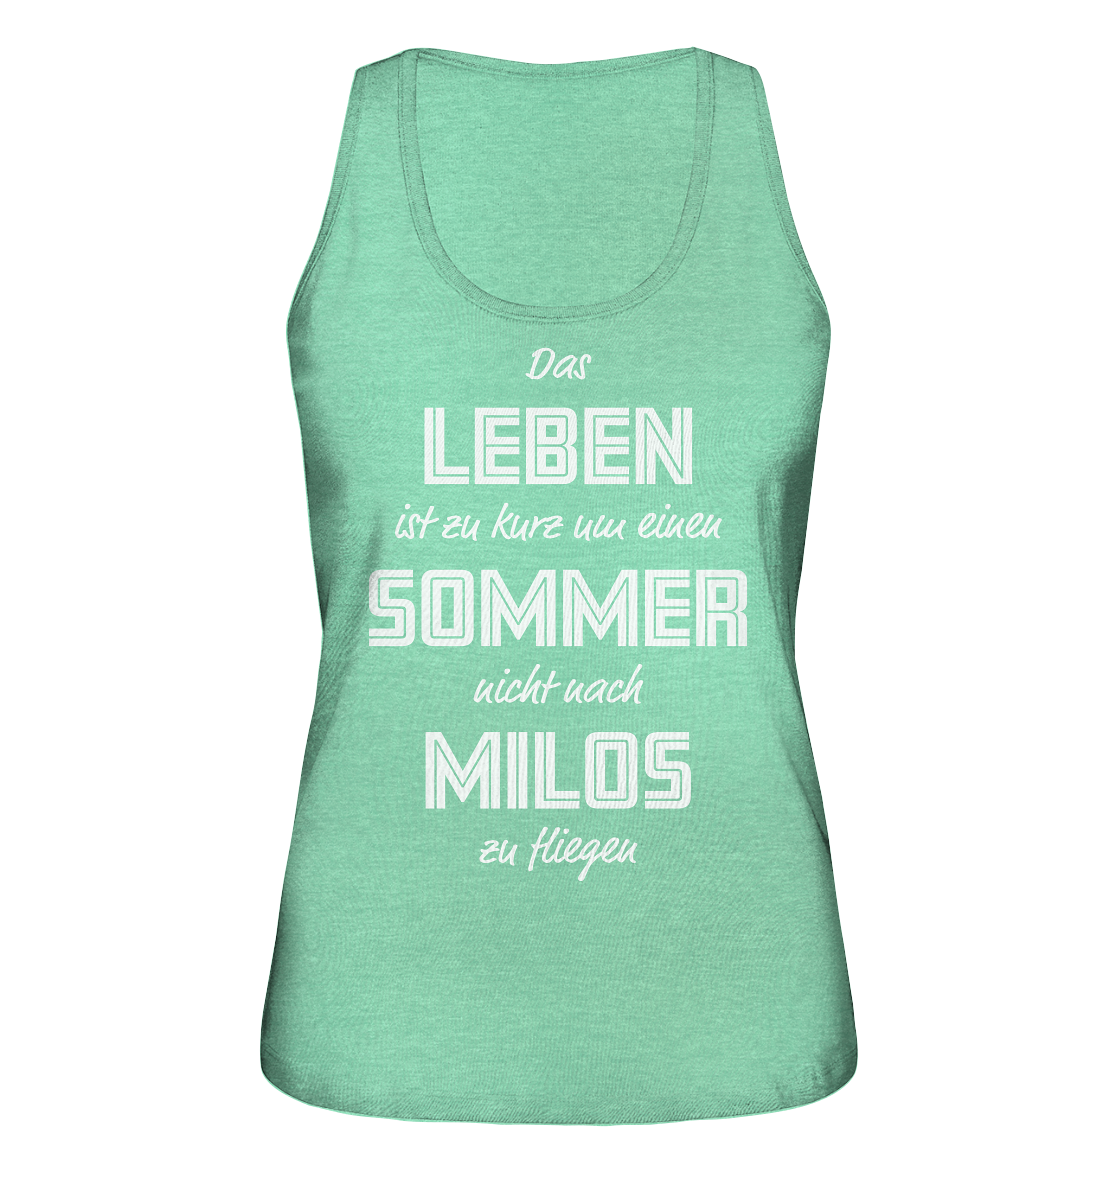 Life is too short not to fly to Milos for a summer - Ladies Organic Tank Top